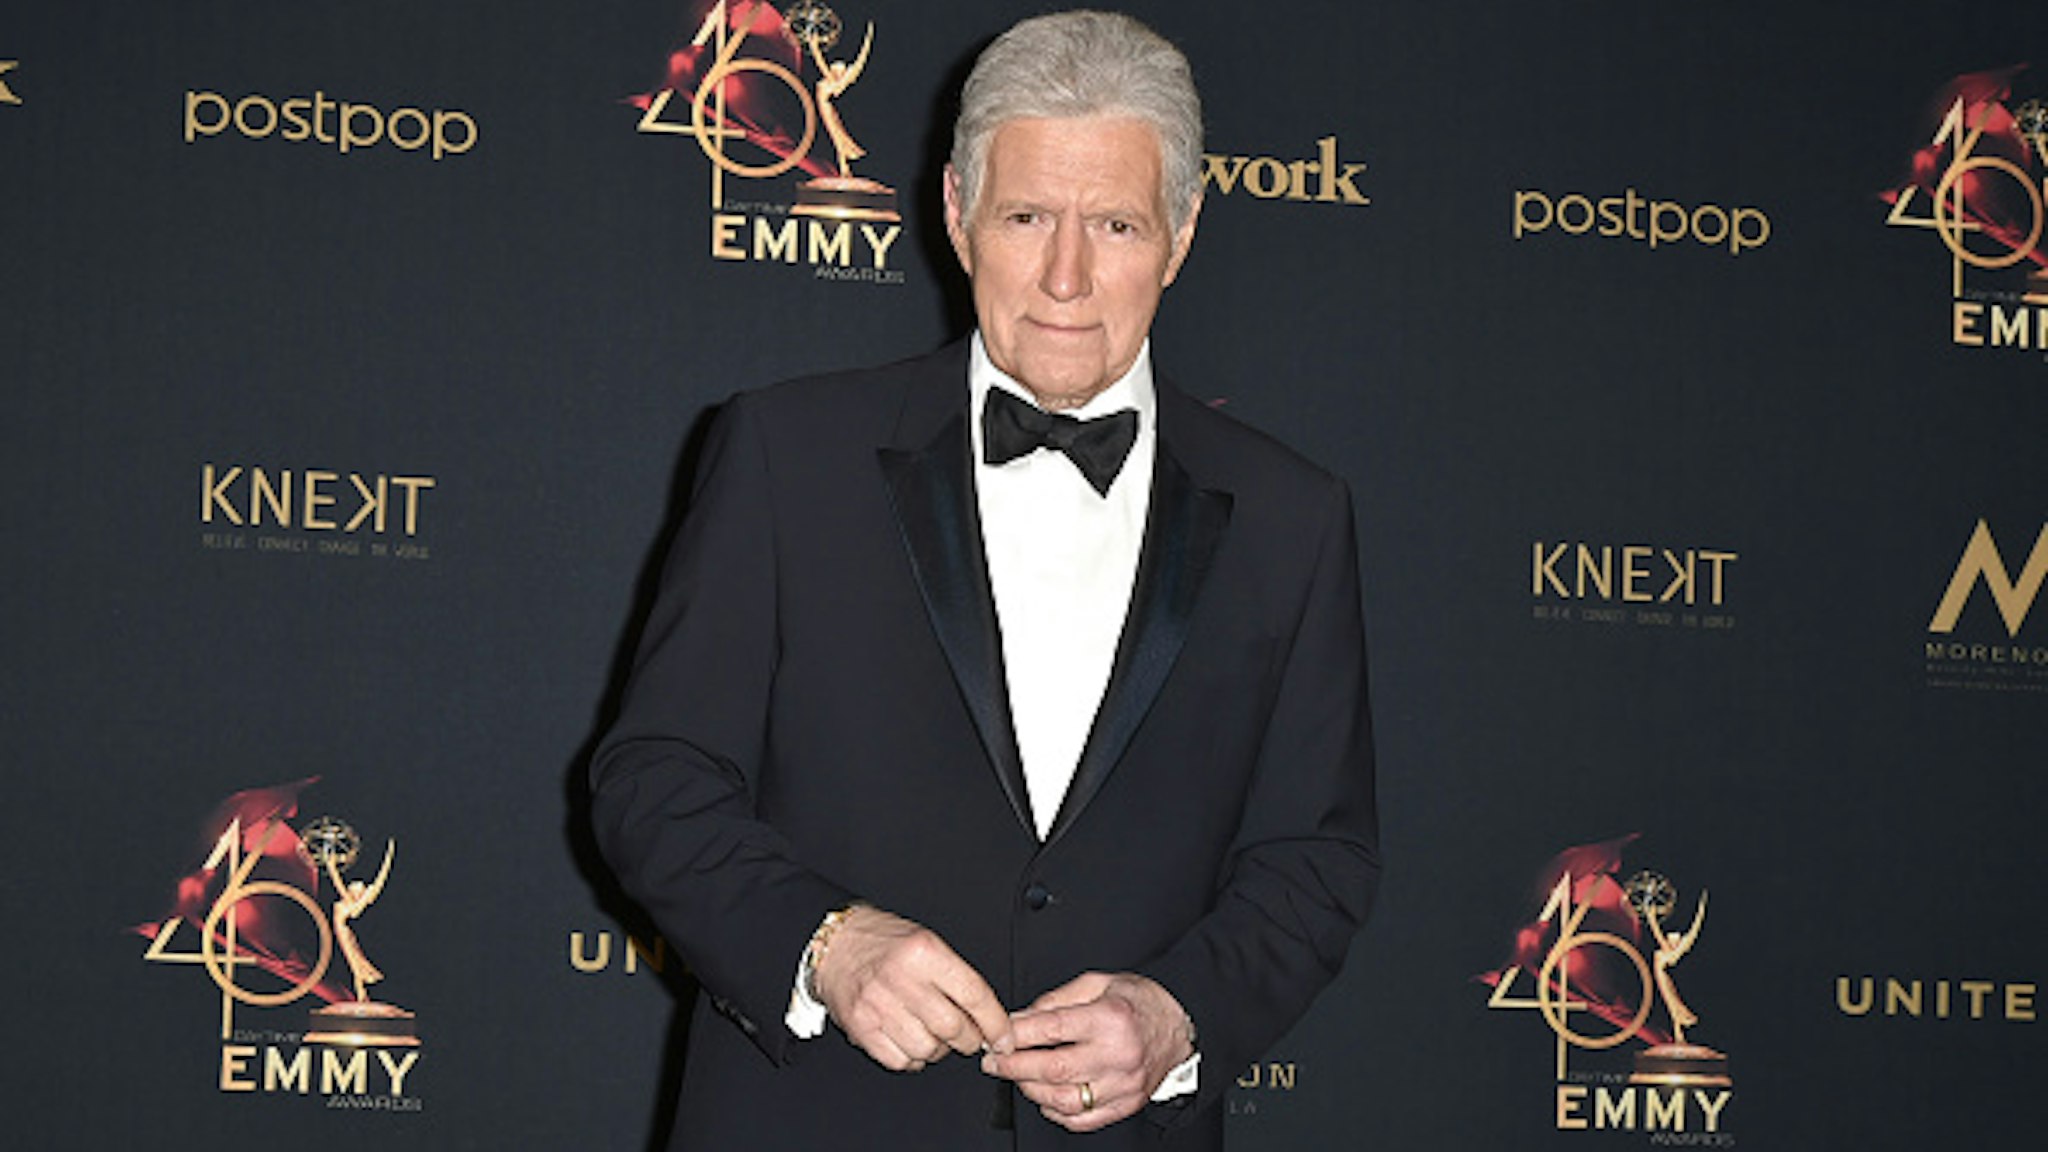 PASADENA, CALIFORNIA - MAY 05: Alex Trebek, winner of the Outstanding Game Show Host award, poses at the 46th Annual Daytime Emmy Awards - Press Room at Pasadena Civic Center on May 05, 2019 in Pasadena, California.